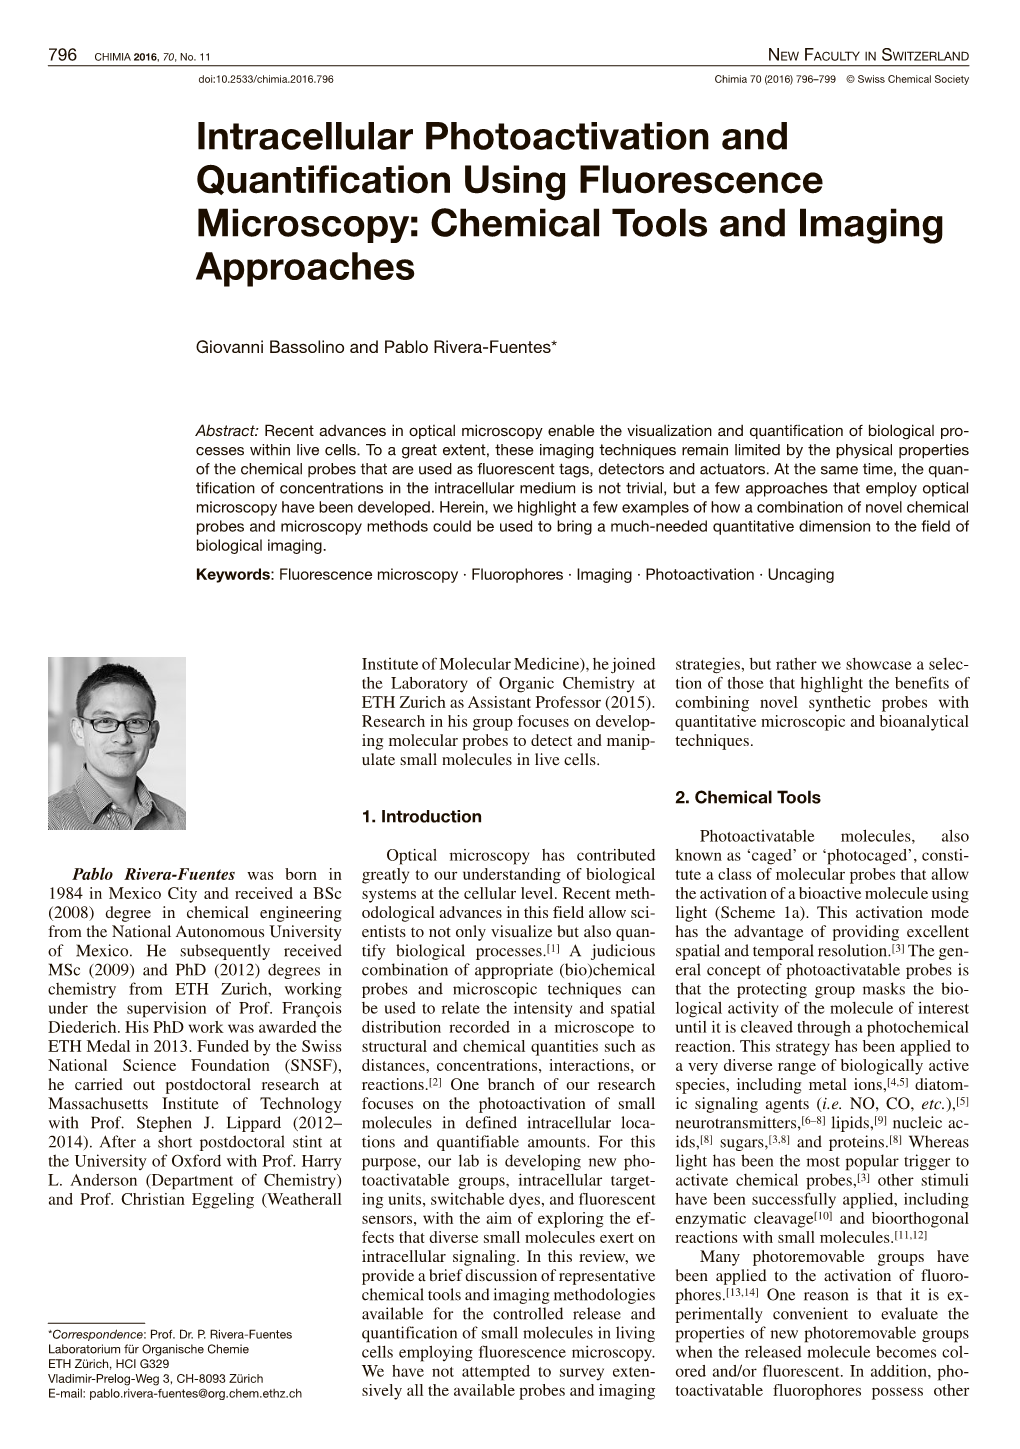 Intracellular Photoactivation and Quantification Using Fluorescence Microscopy: Chemical Tools and Imaging Approaches